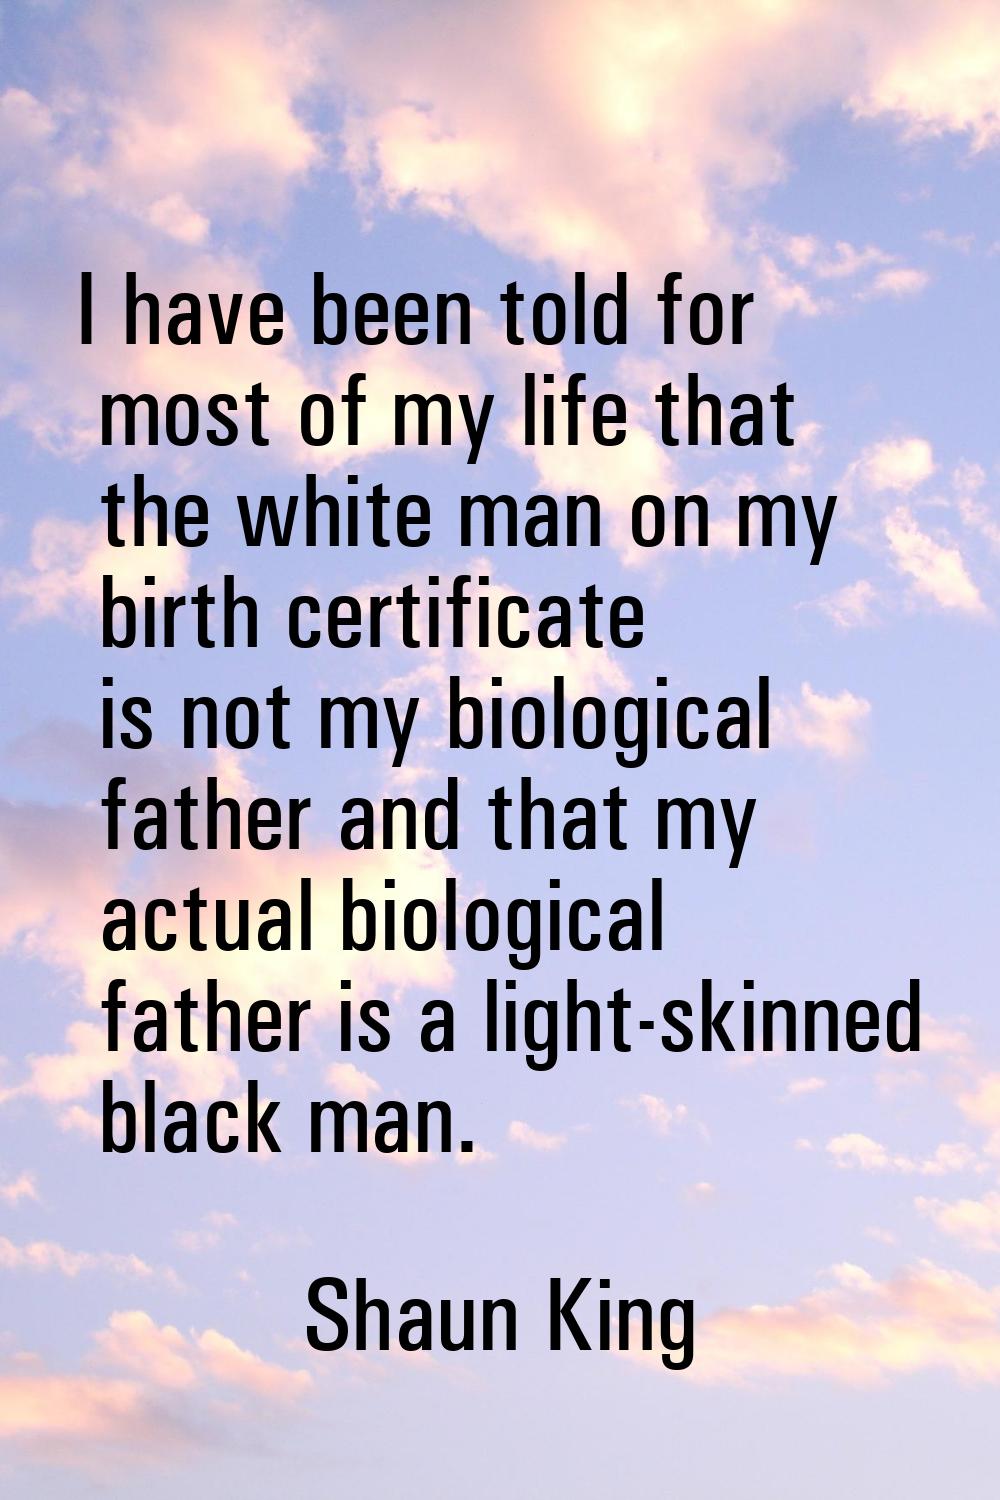 I have been told for most of my life that the white man on my birth certificate is not my biologica